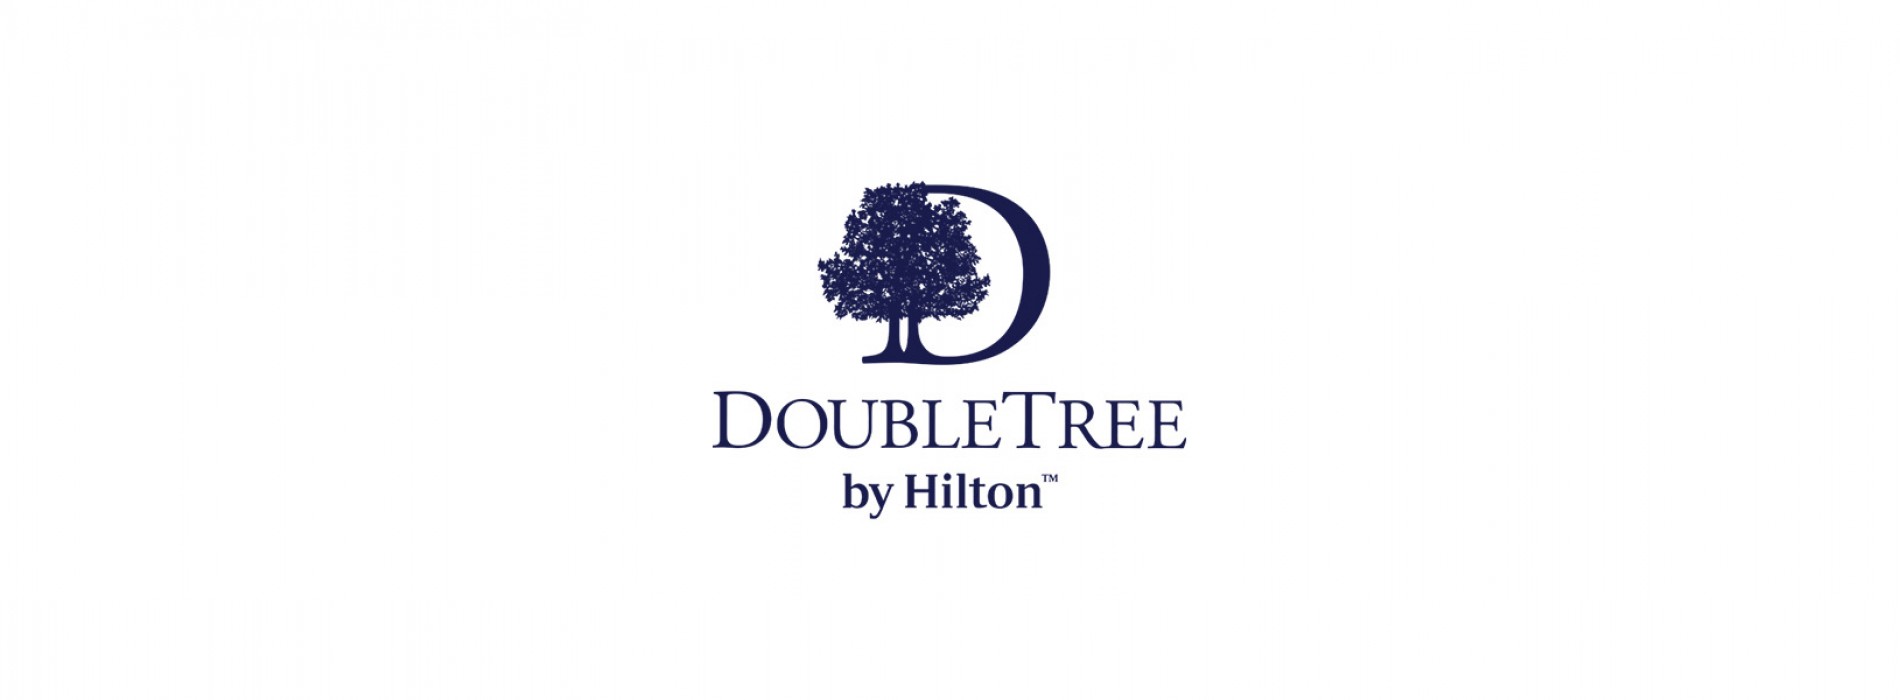 DoubleTree by Hilton Gurugram Baani Square announces promotion of Abhishek Kumar as DIRECTOR OF SALES